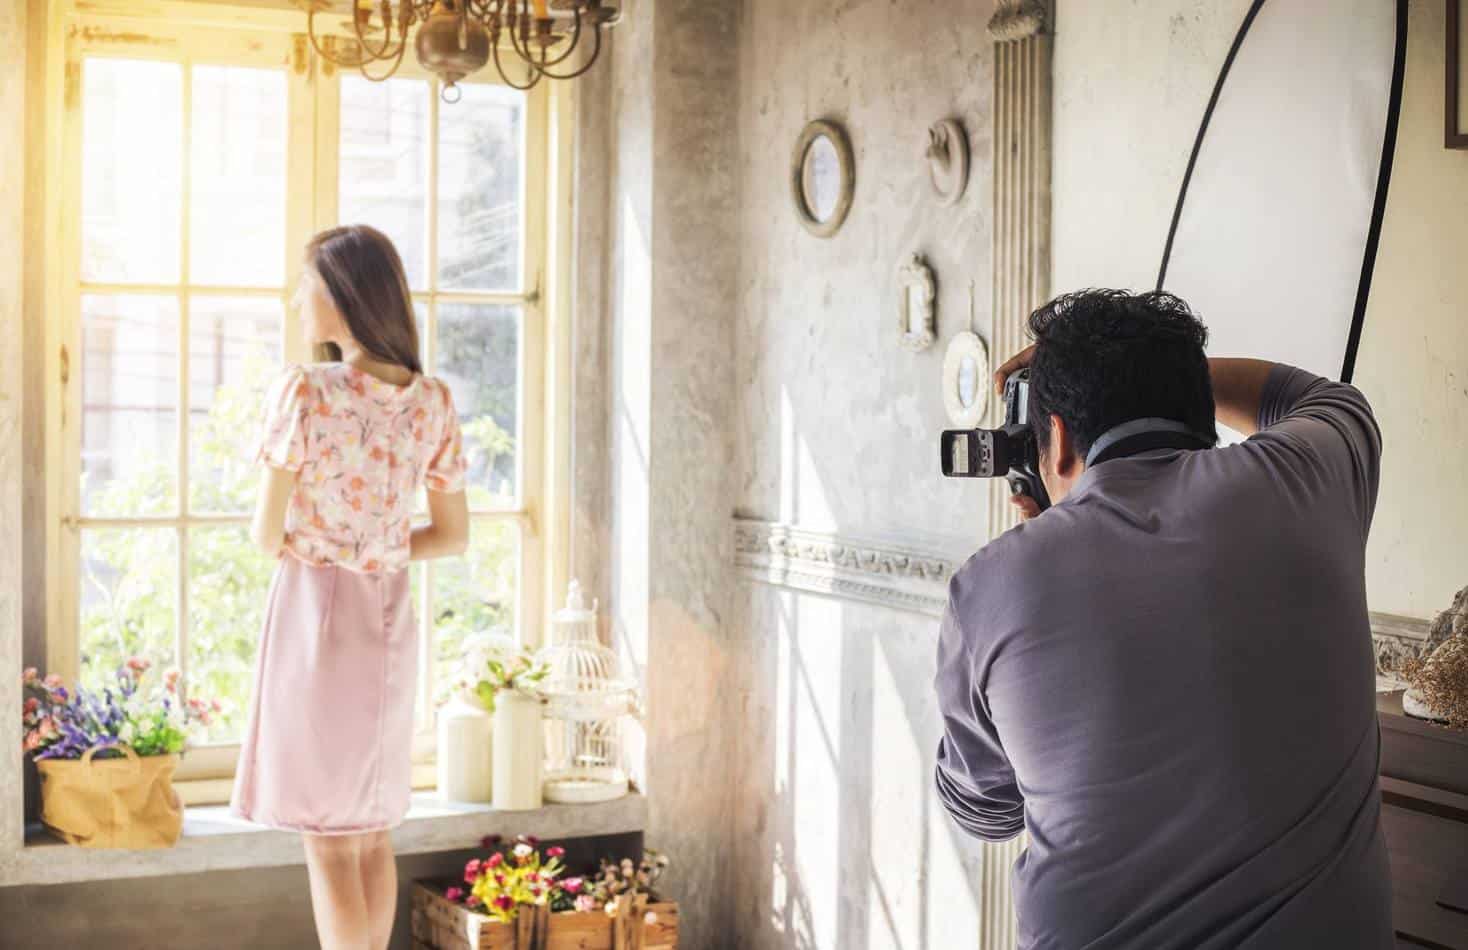 Professional Photographer Taking a Portrait of a Fashion Model at Vintage Interior Studio Location with Morning Light